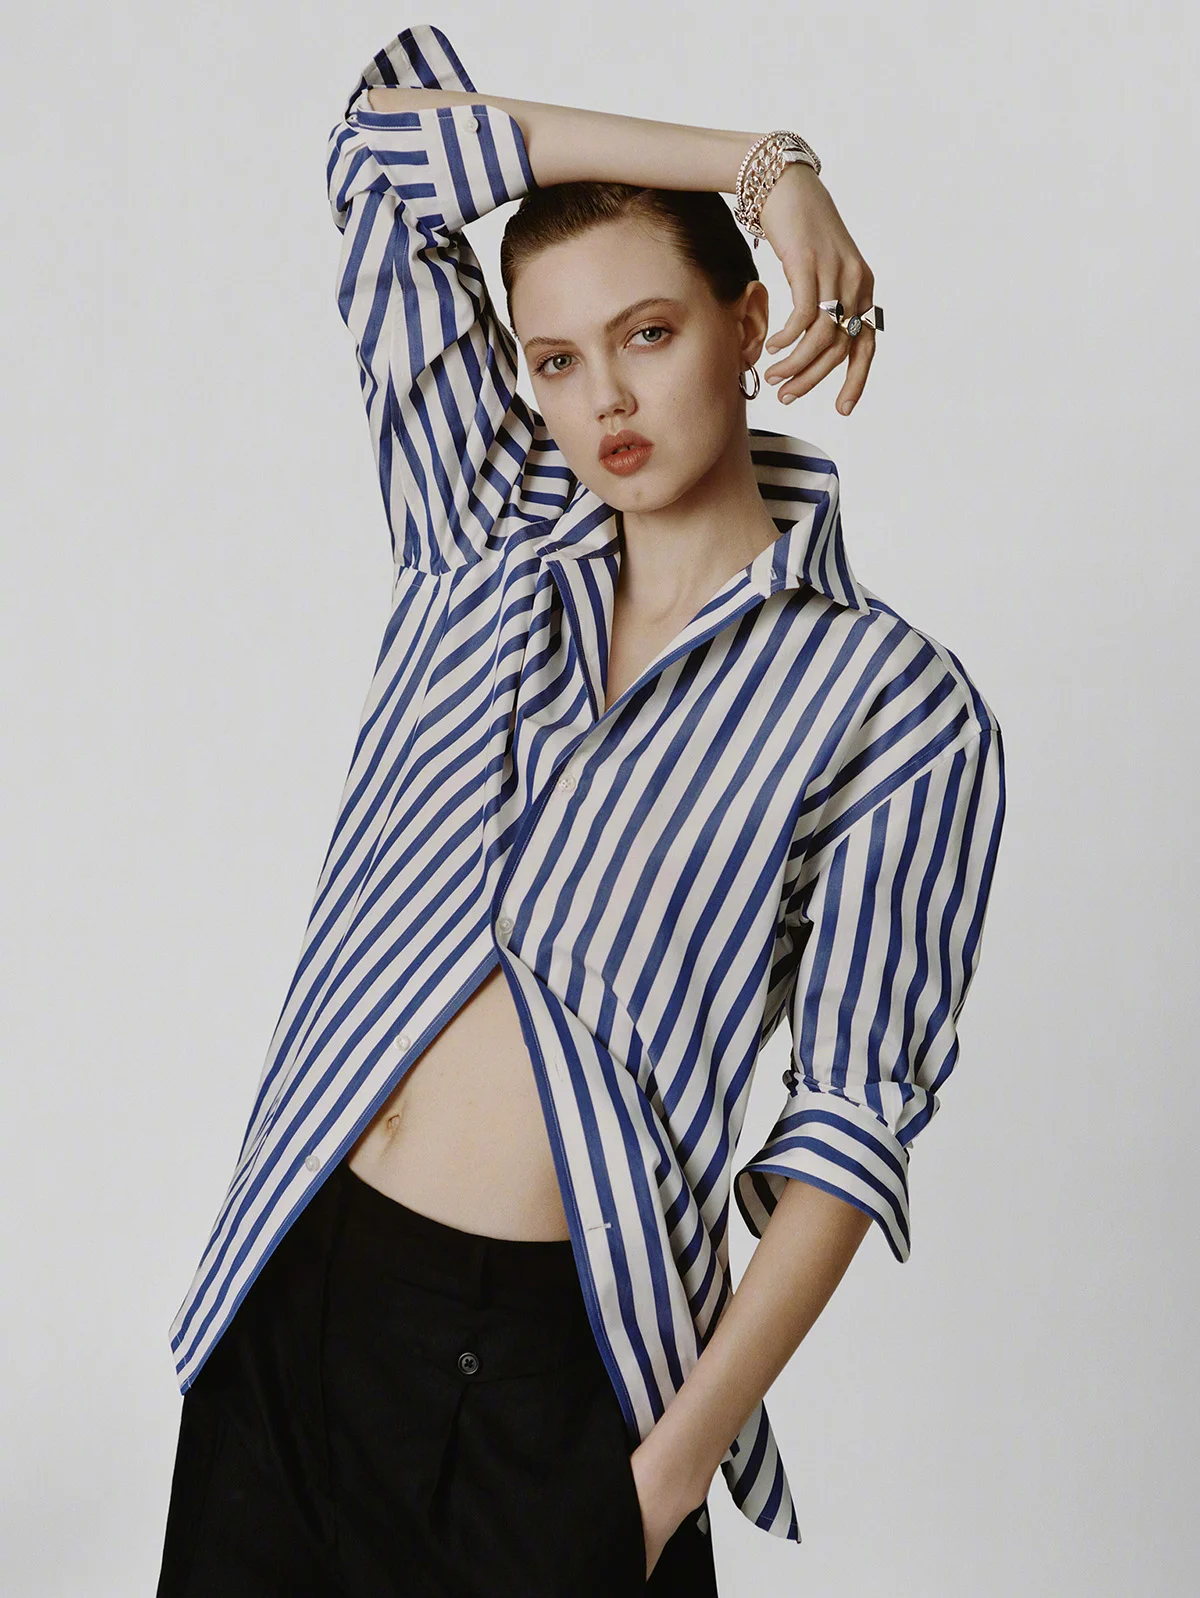 Lindsey Wixson by Matt Healy for British Vogue May 2022